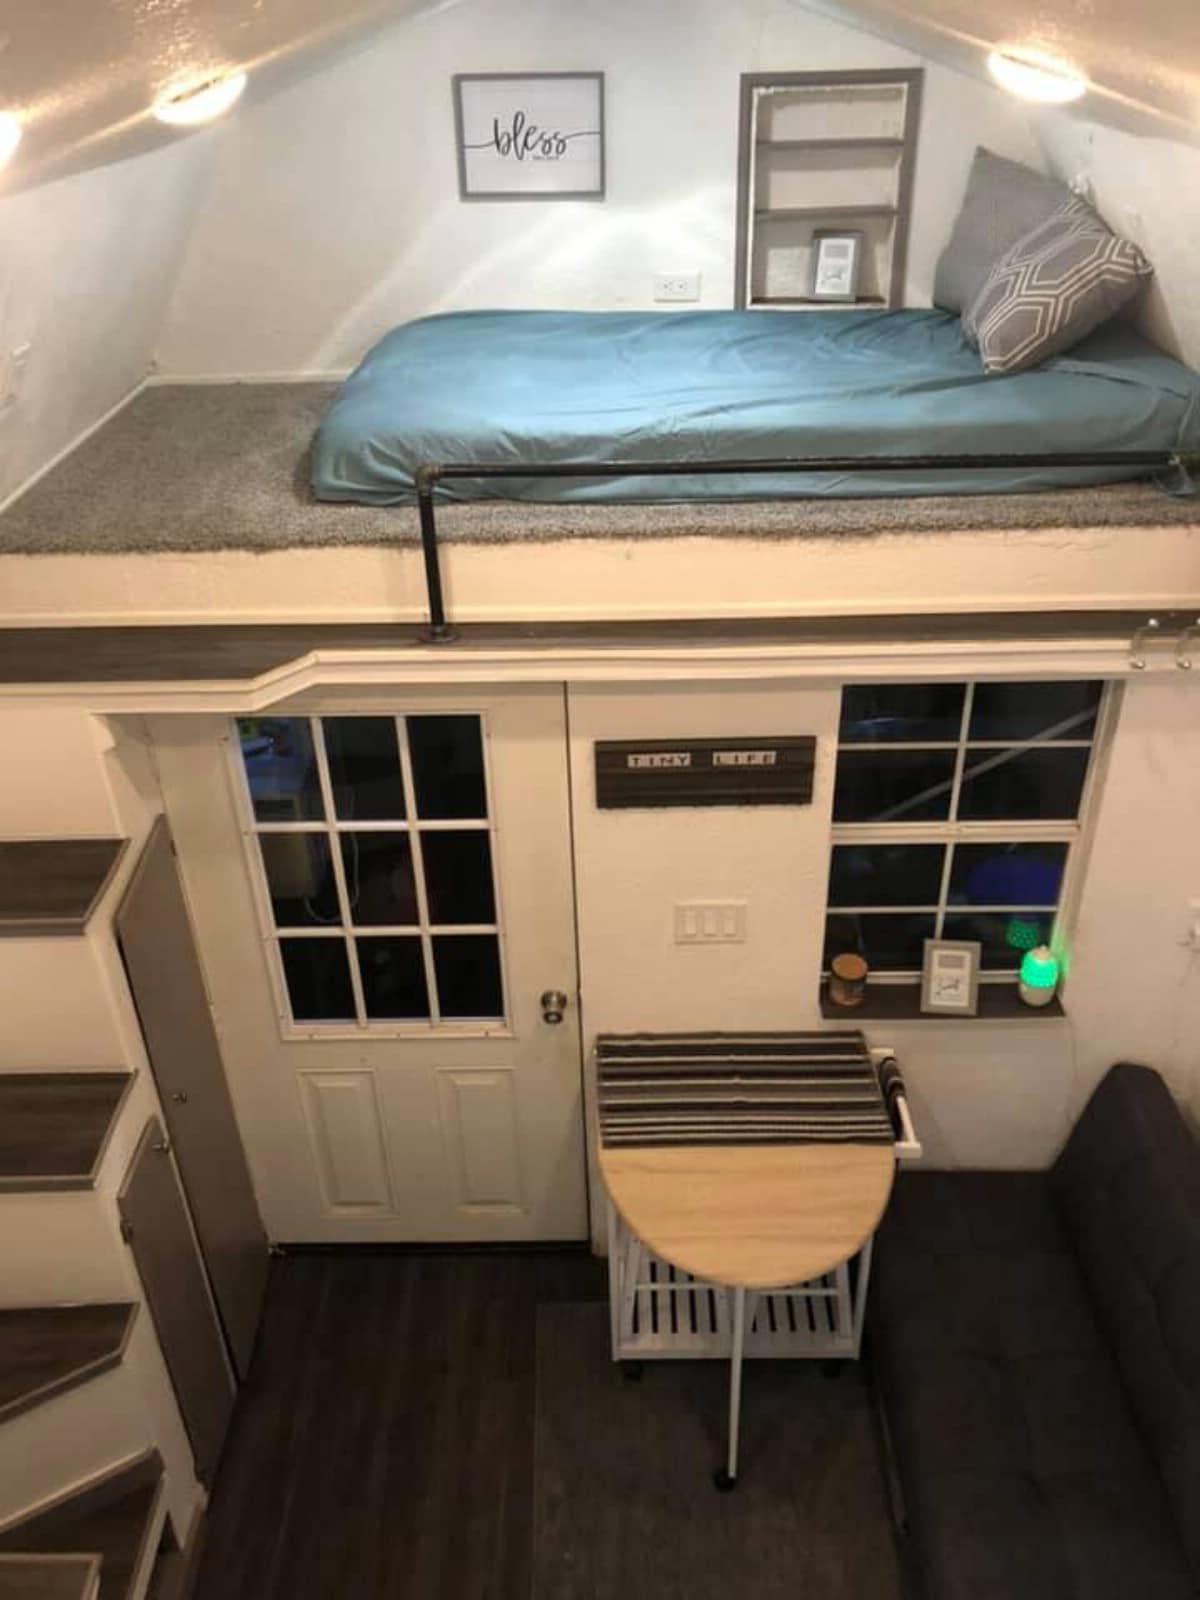 This Lovely 10’ x 20’ Tiny House is on Sale in Florida for Just $19,000